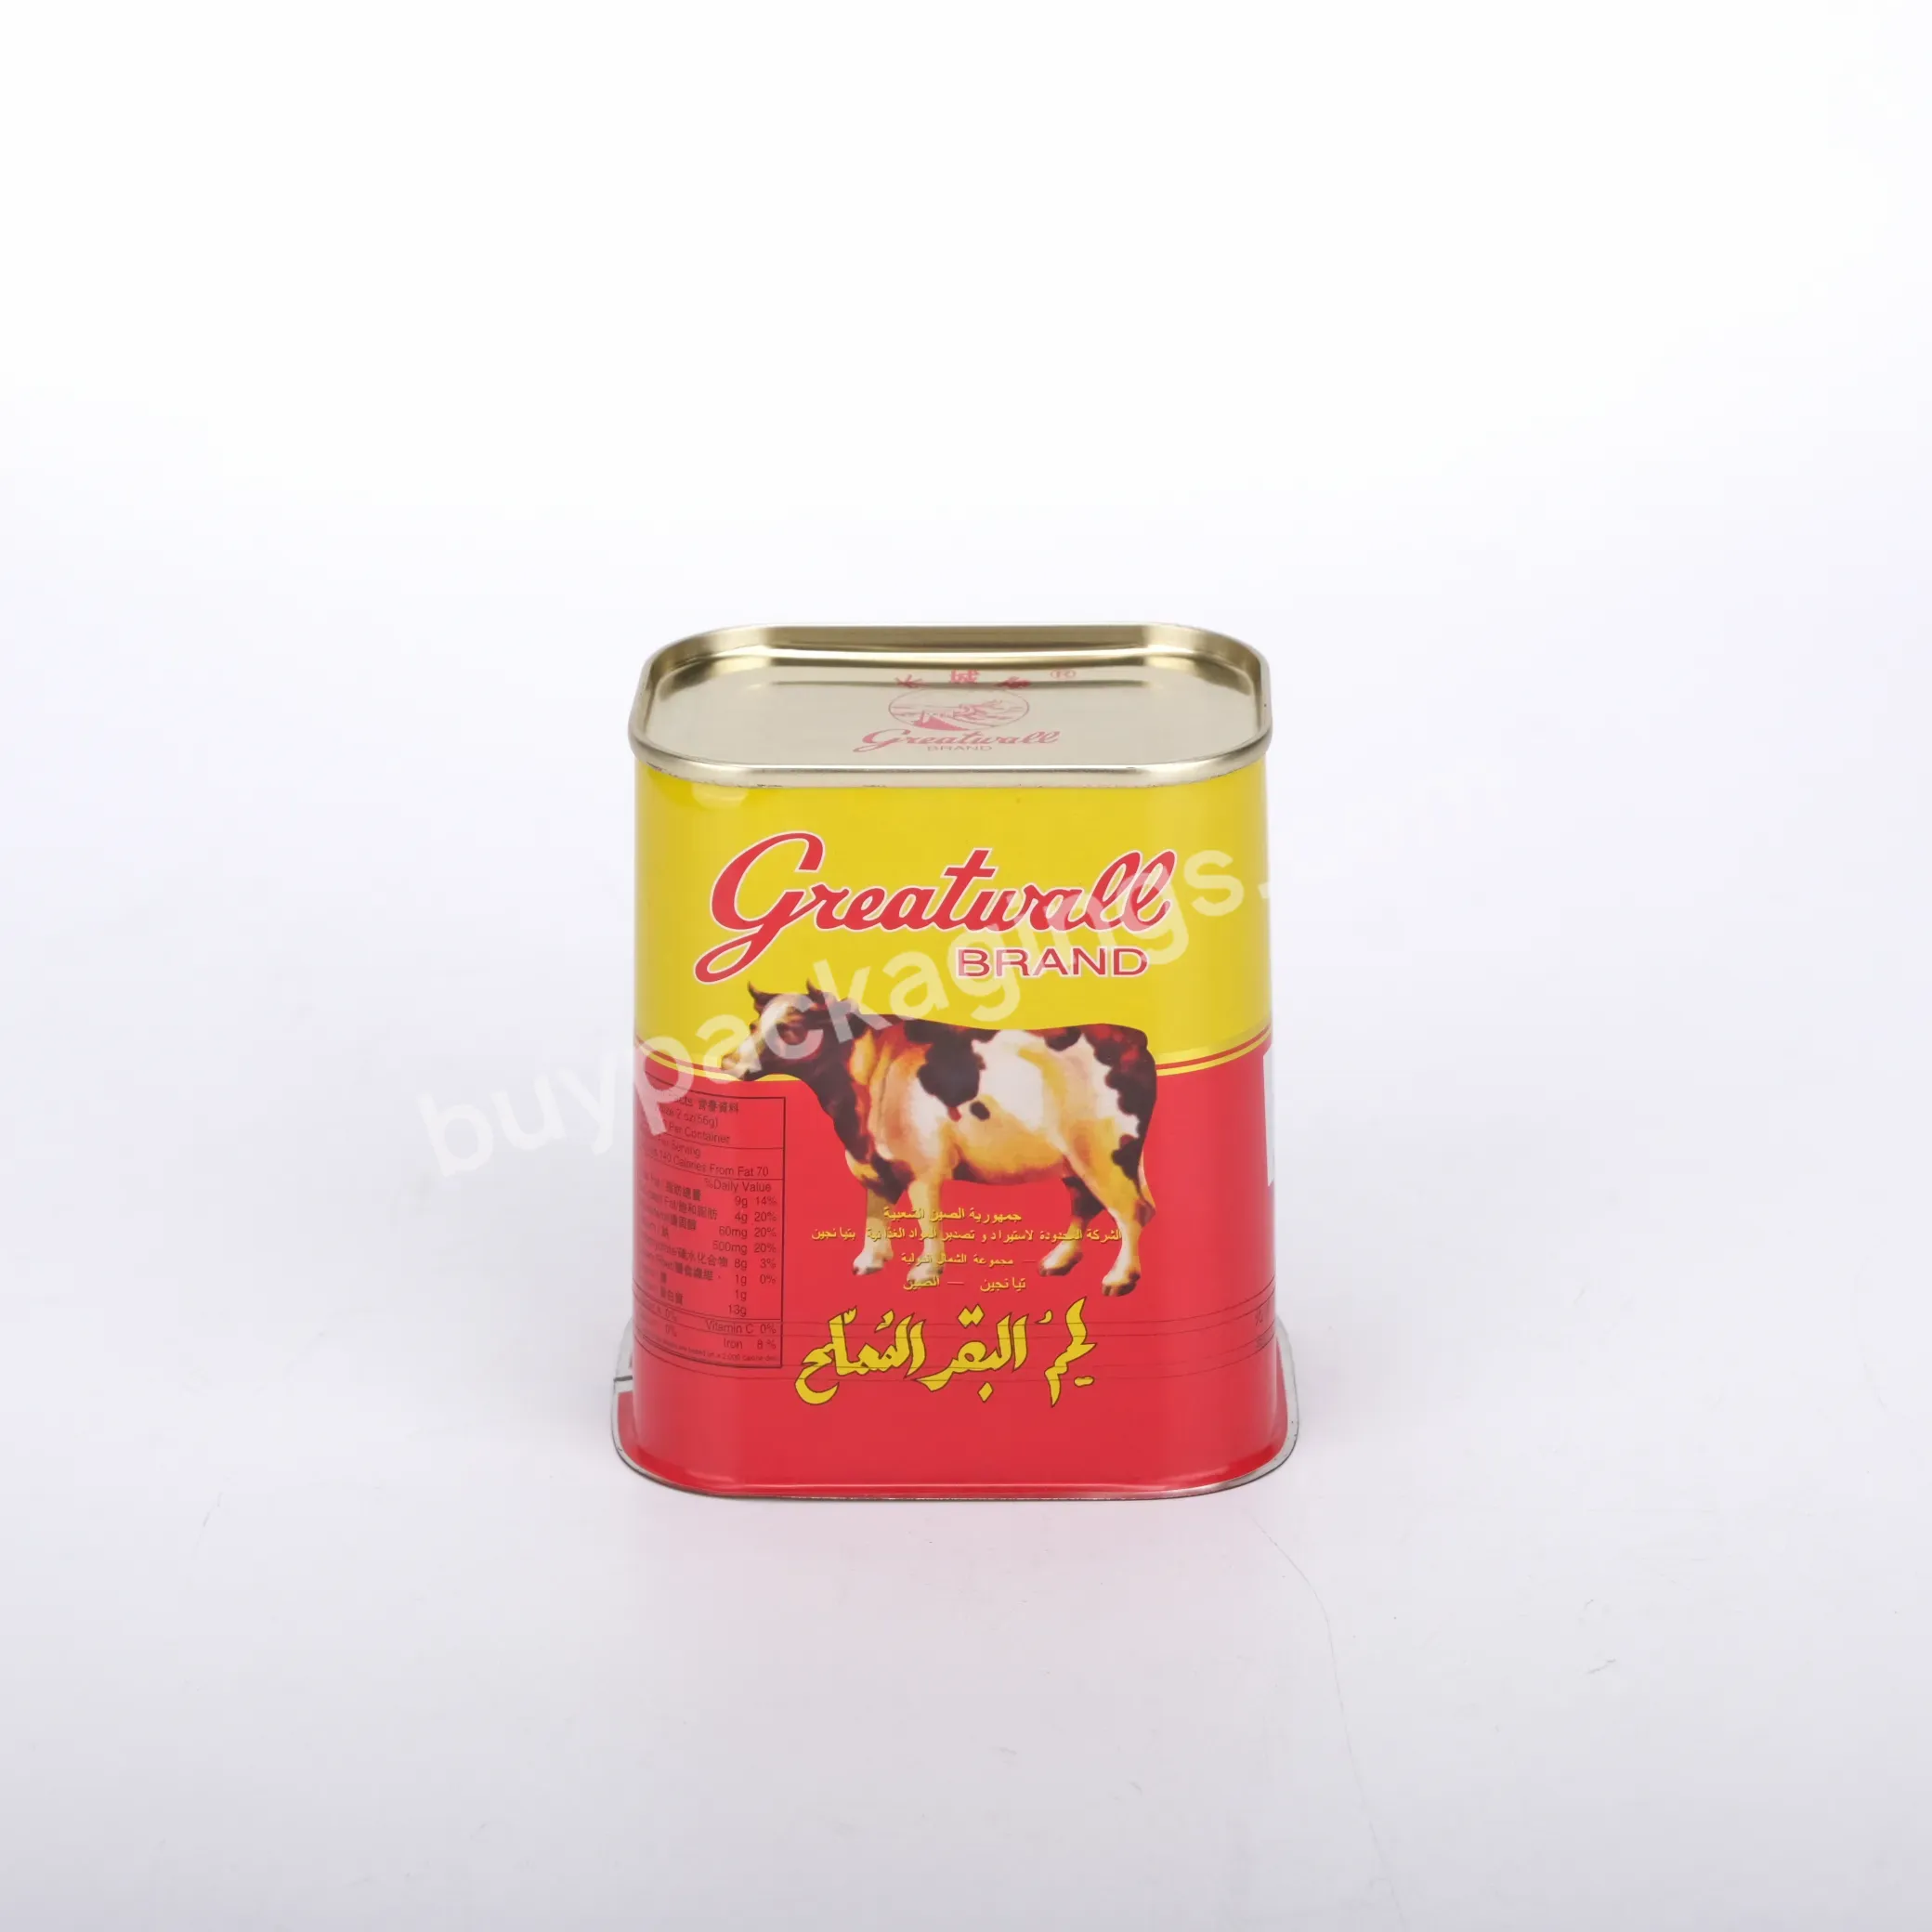 Manufacture Hotselling Metal Food T-style Metal Tin Can For Luncheon Meat Or Beef Use Canned Food